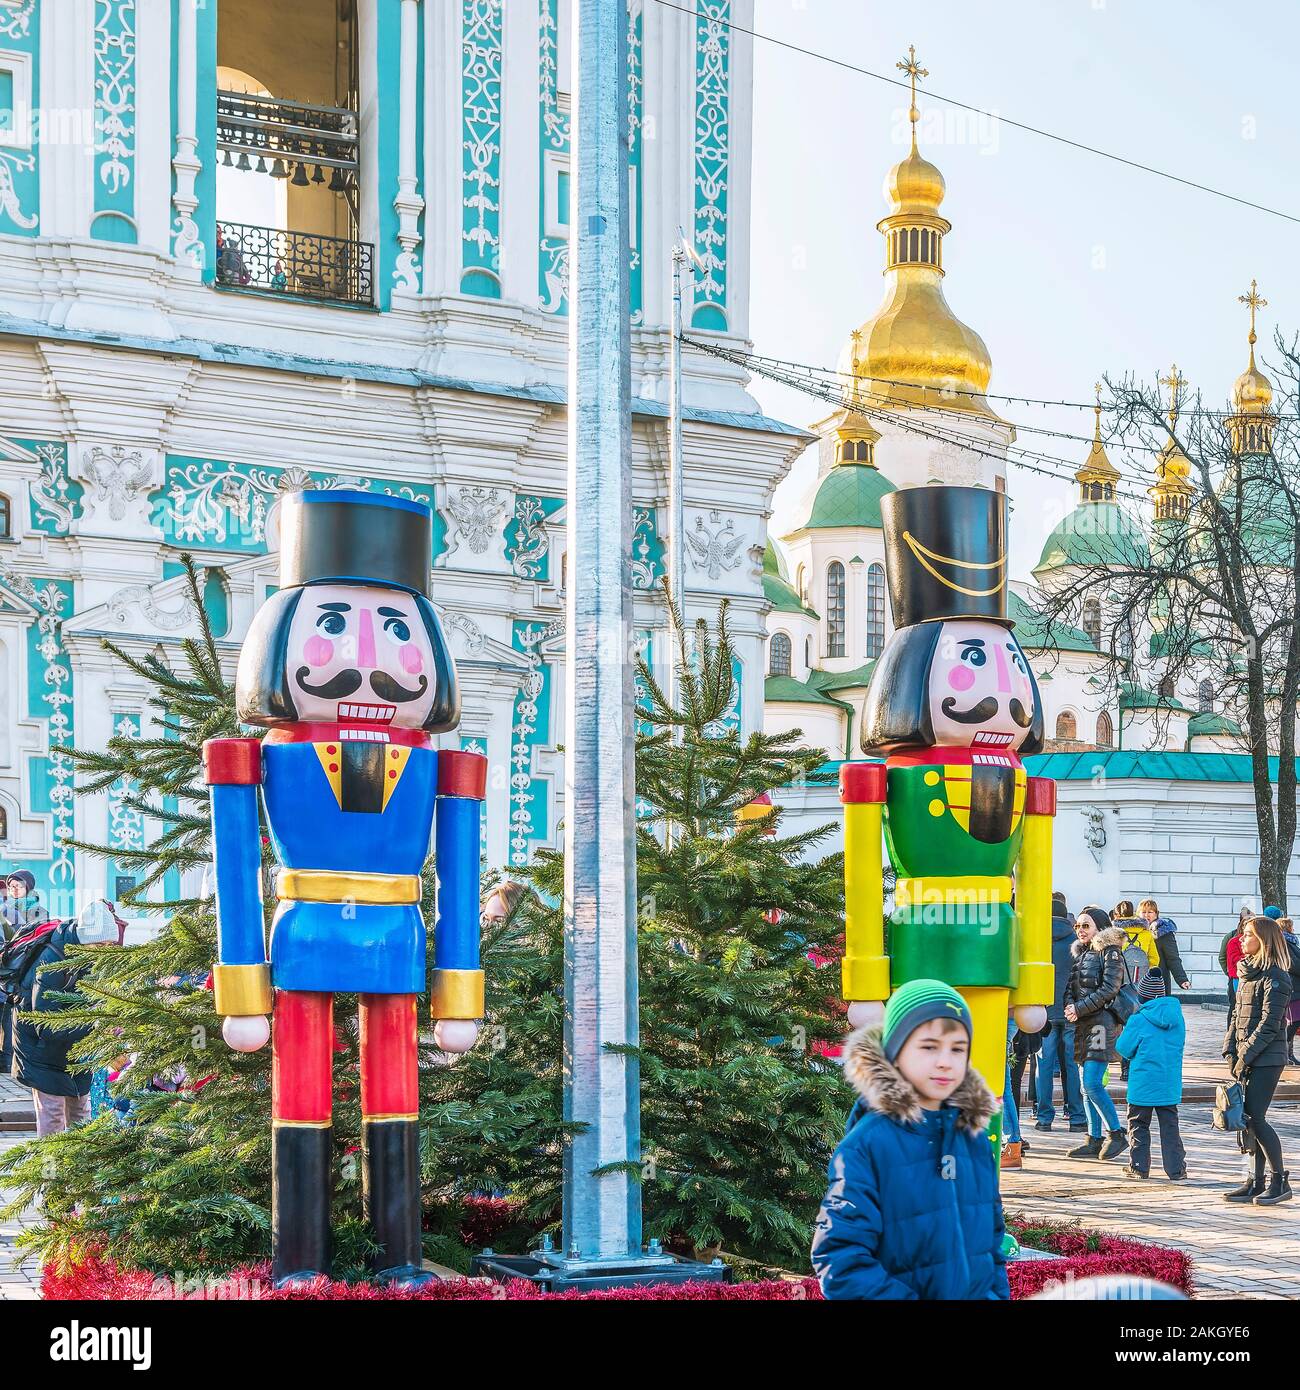 Kiev, Ukraine - January 3, 2020: Christmas tree is installed on Sophia Square. The magical world of adventures of the famous Nutcracker story gives gu Stock Photo